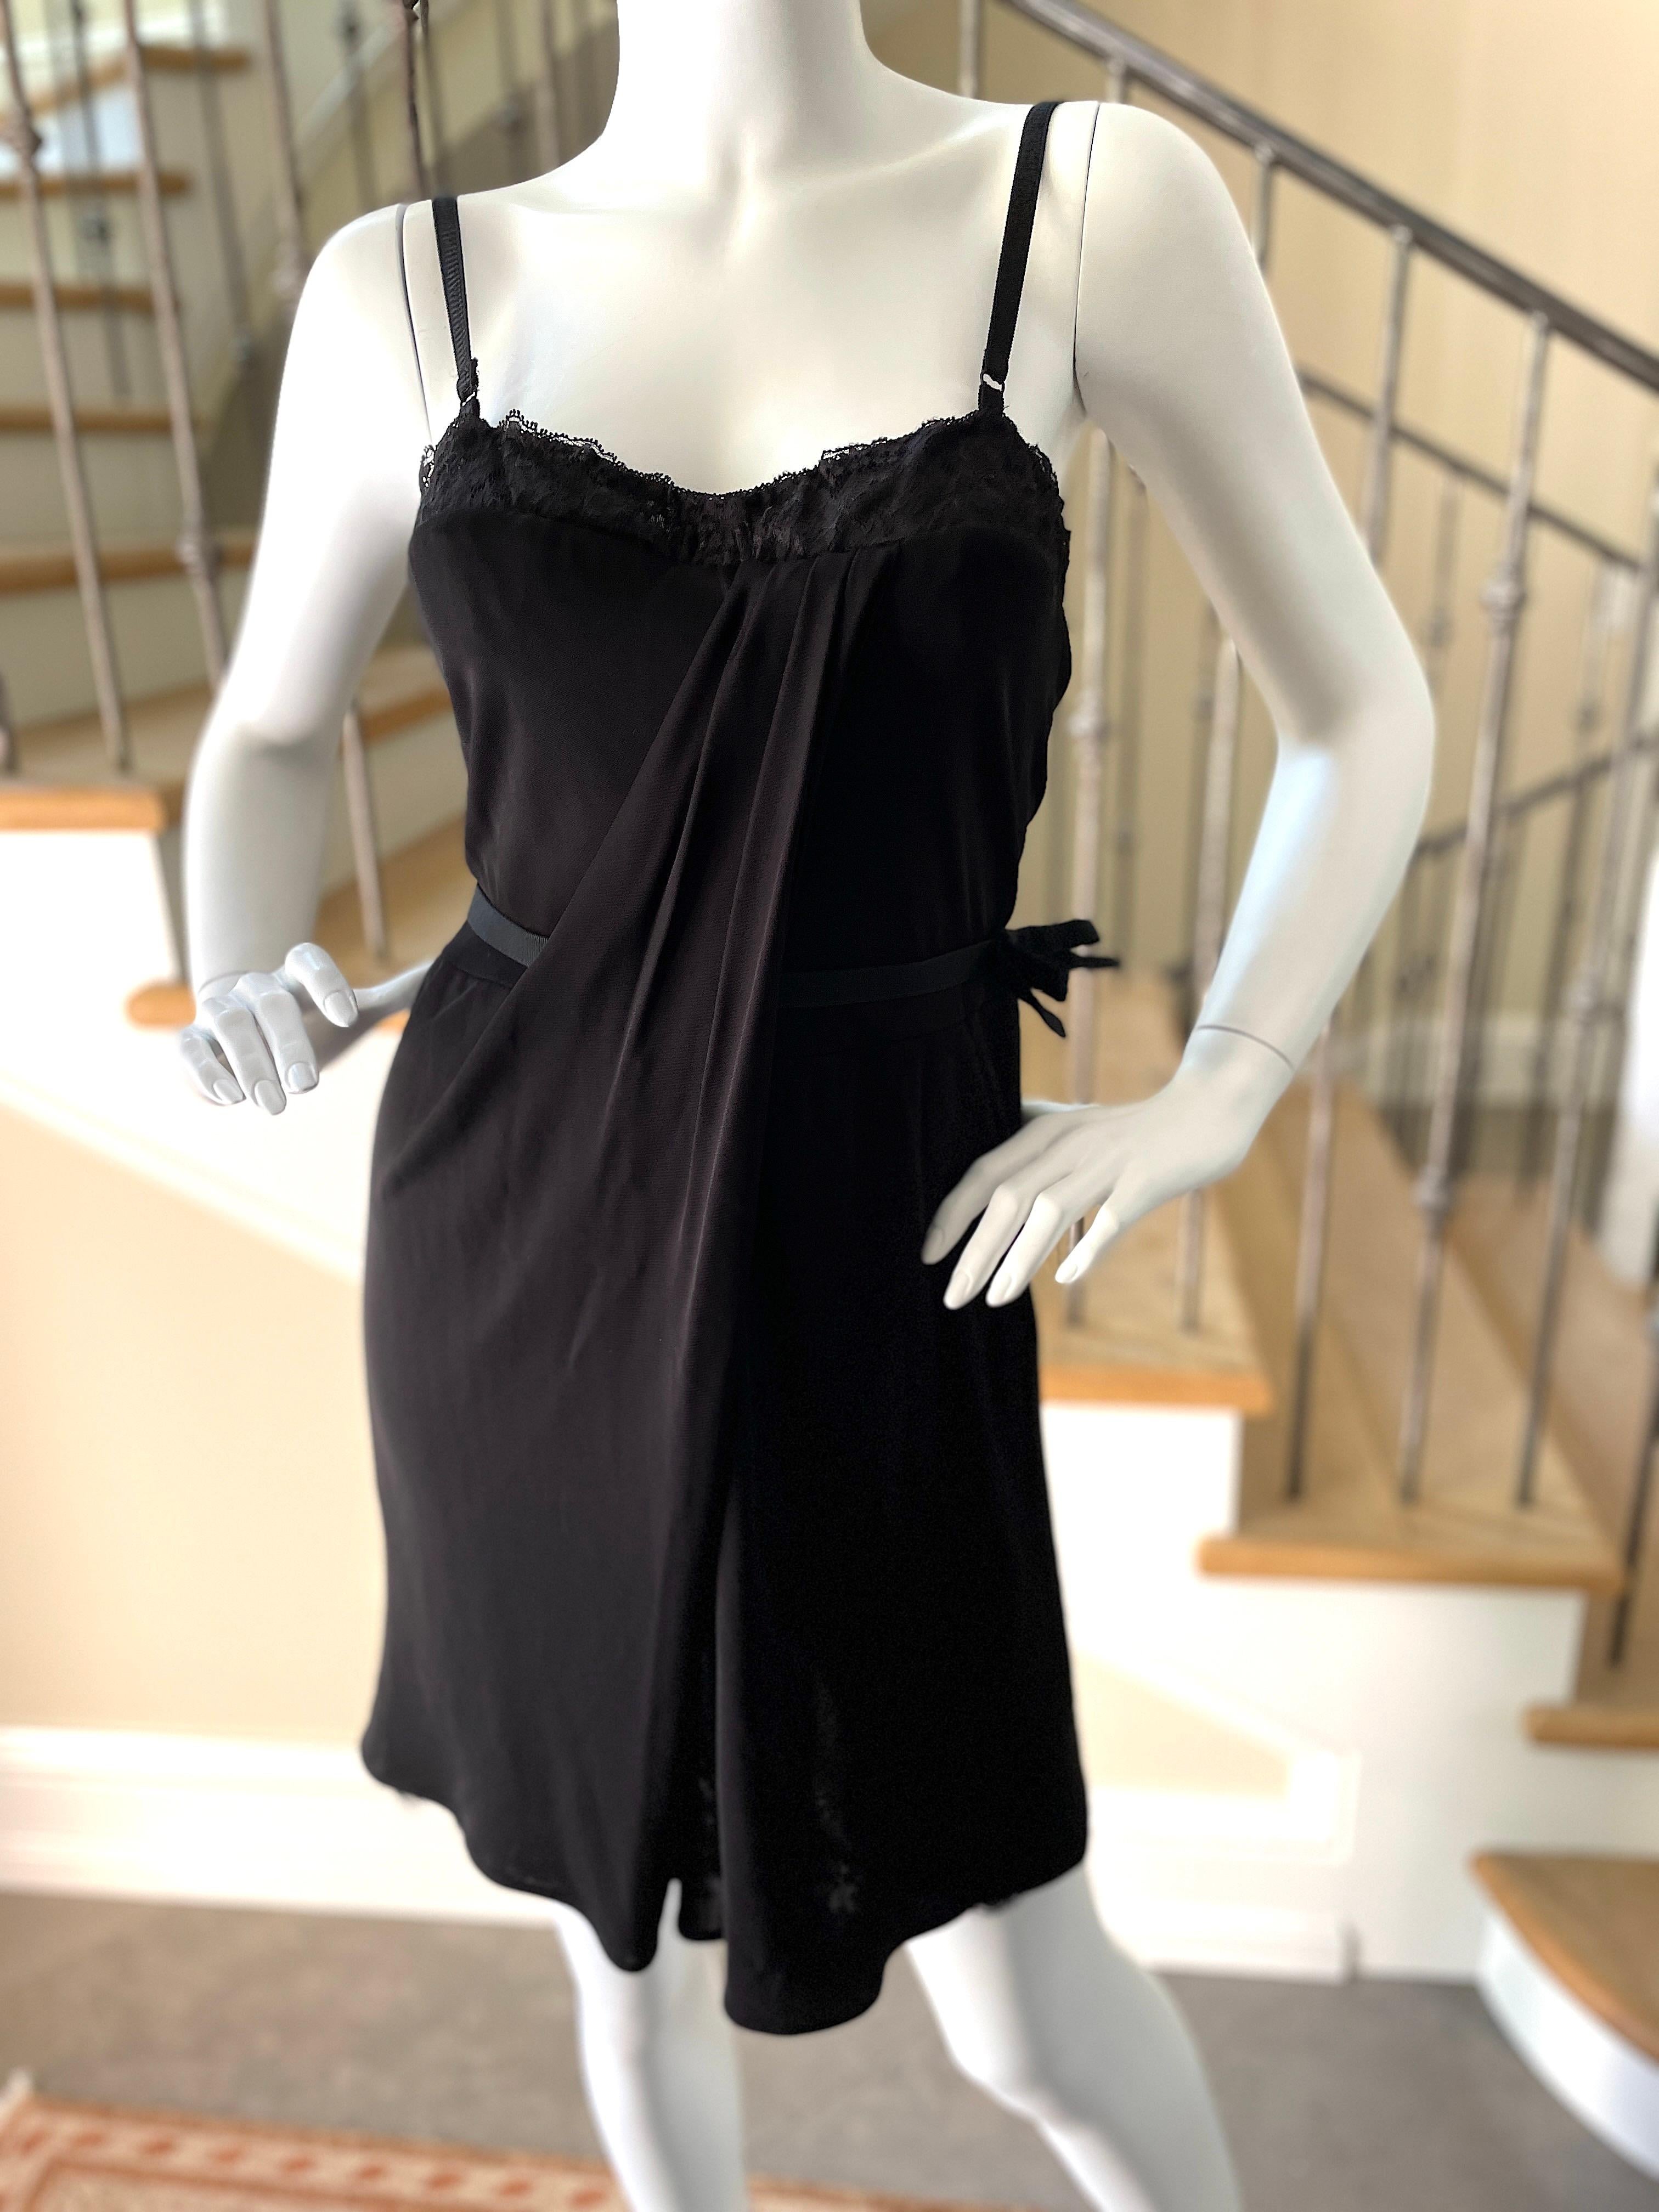 D&G by Dolce & Gabbana Vintage Black Cocktail Dress with Inner Corset NWT For Sale 3